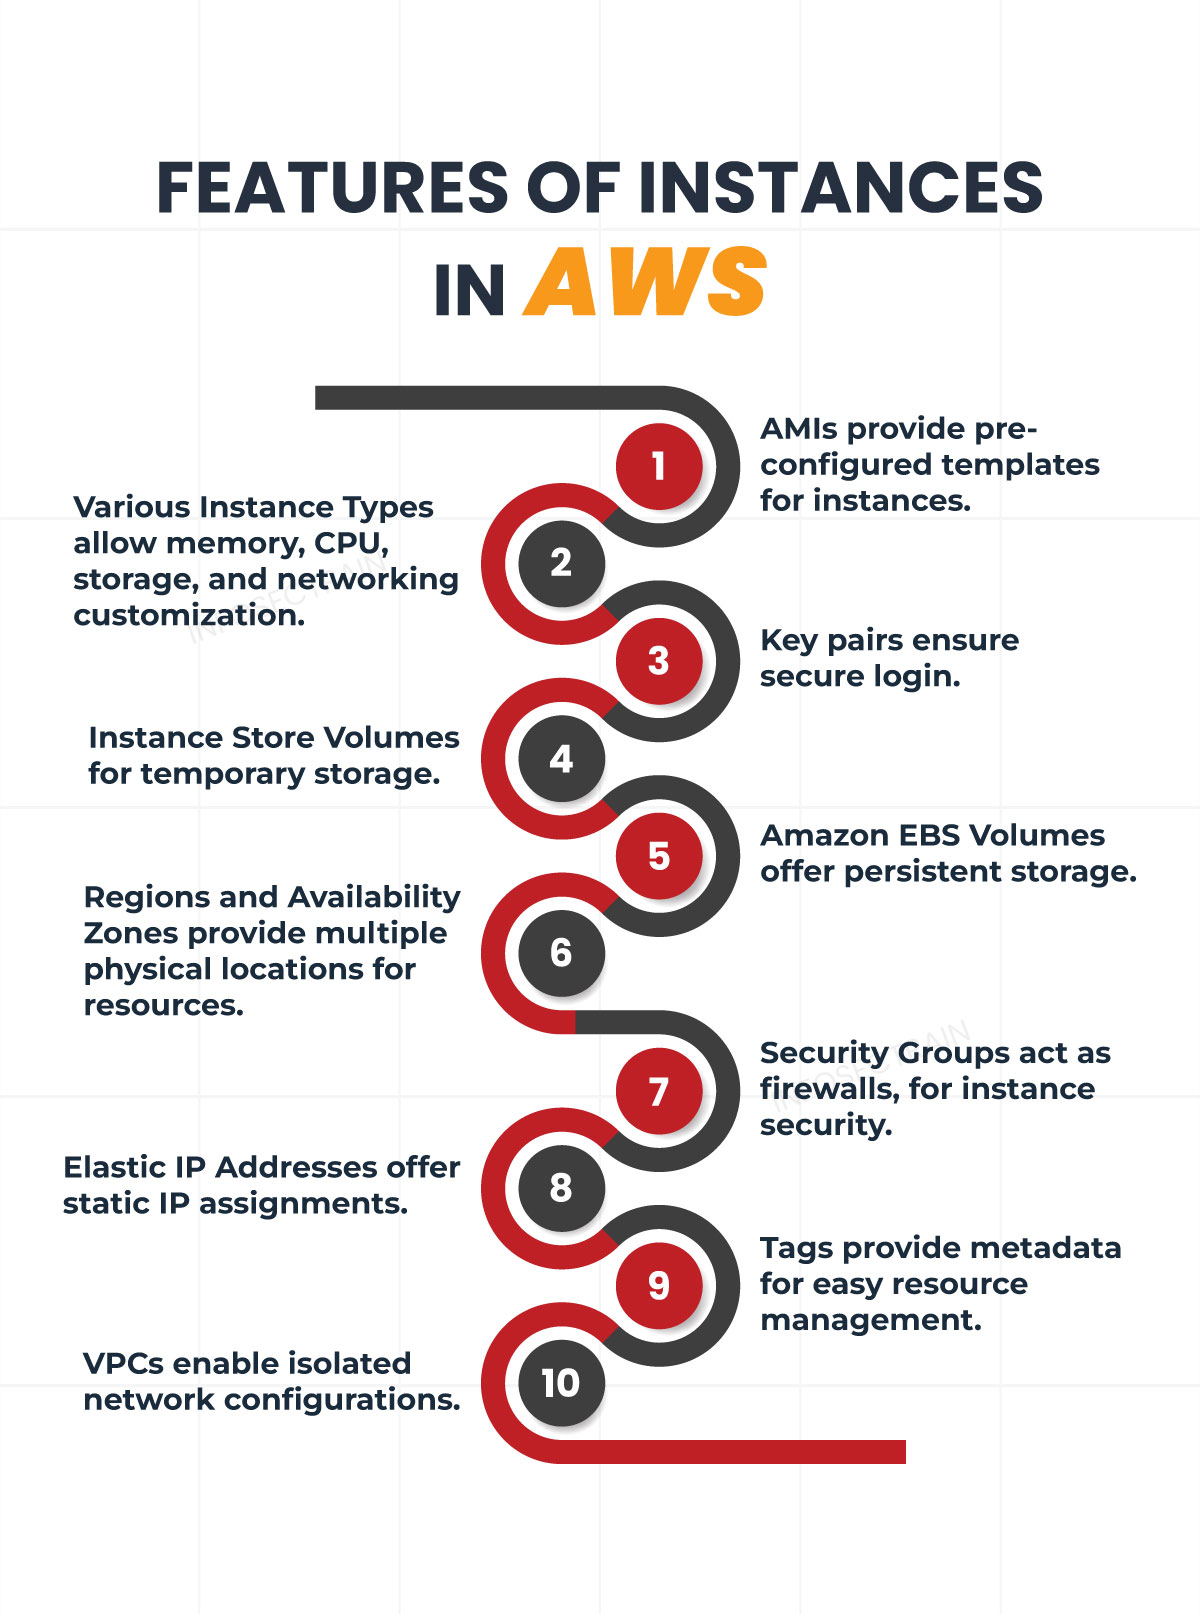 Features of AWS Instances